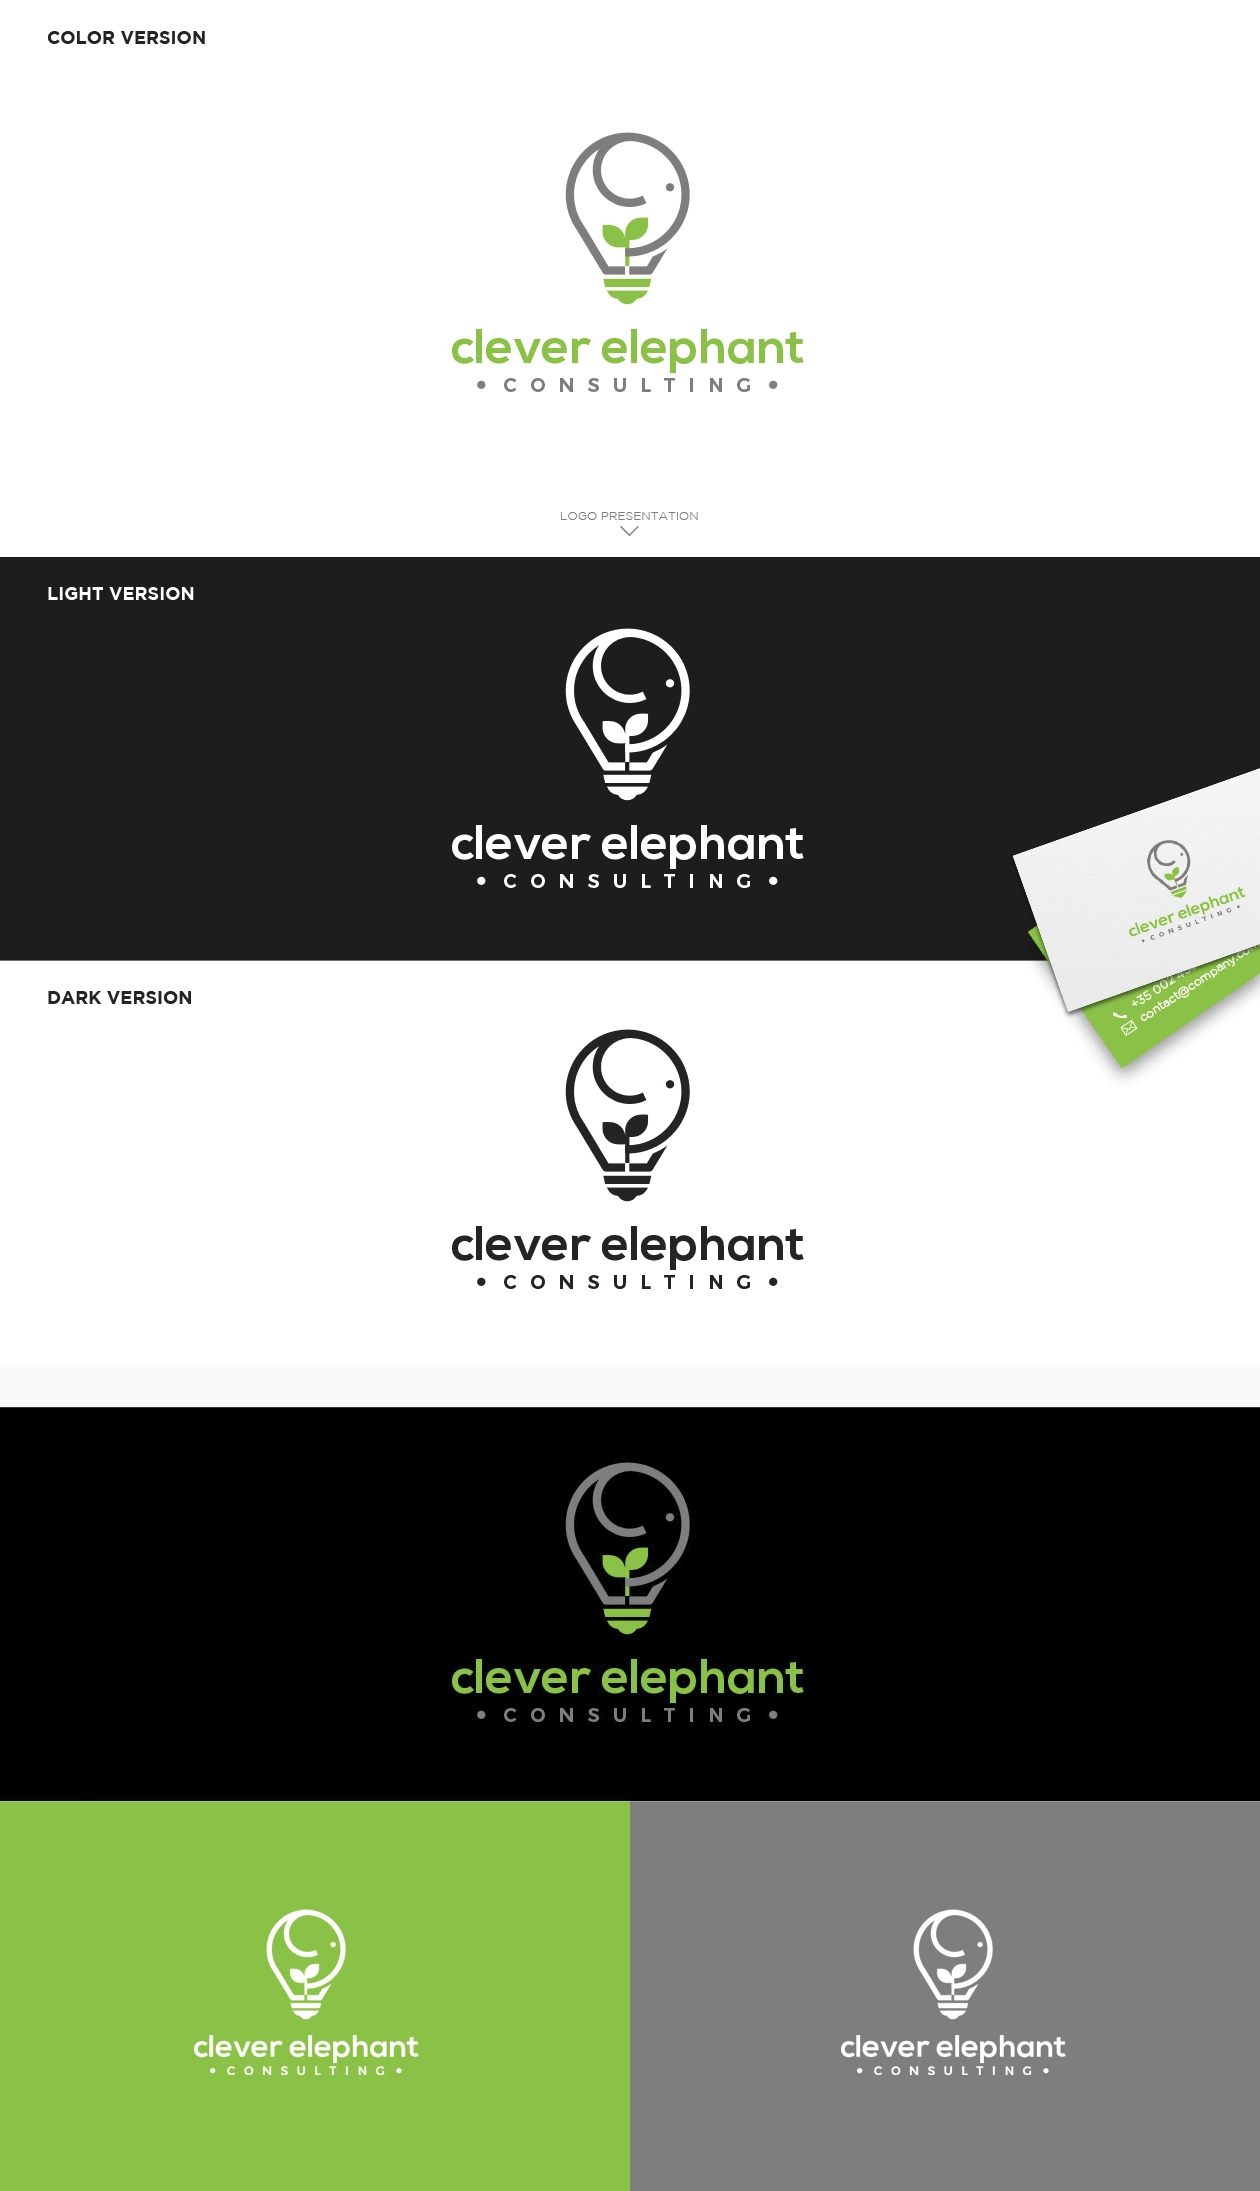 clever-elephant-consulting.jpg